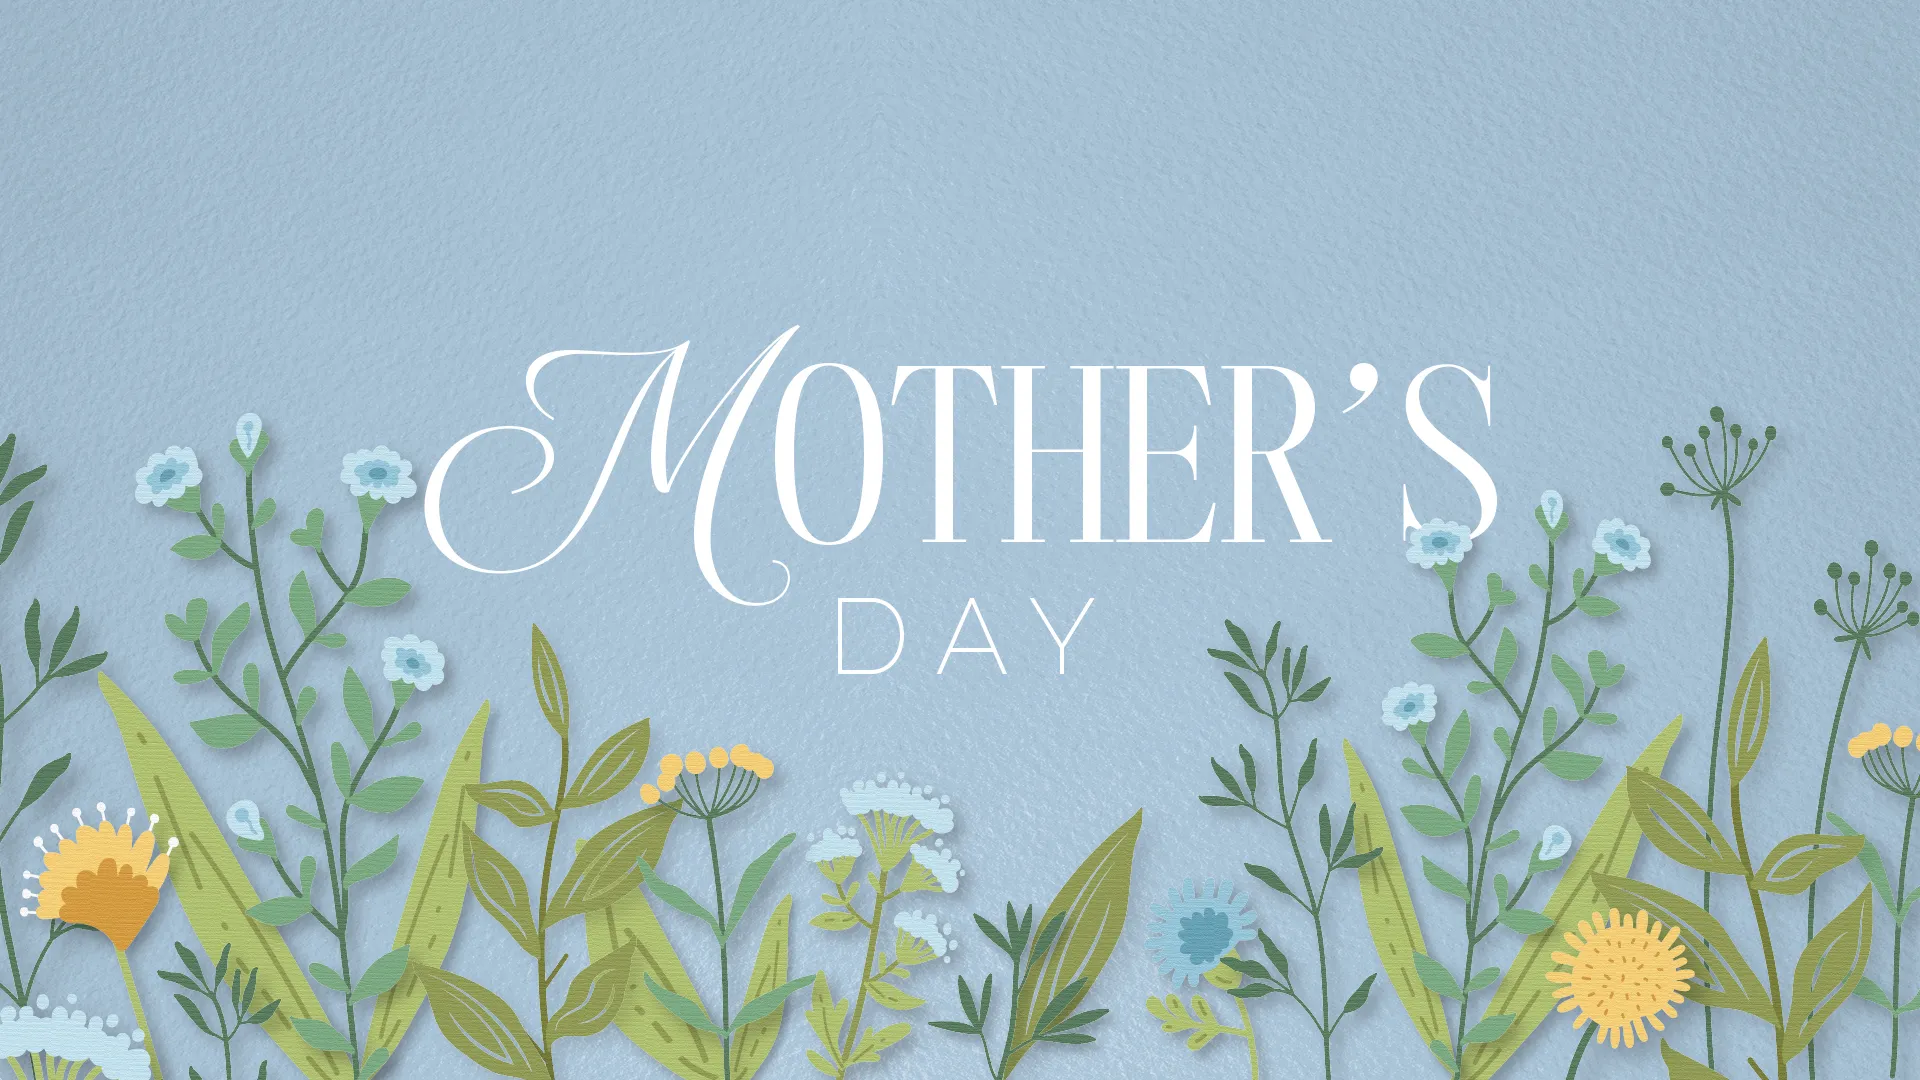 Welcome A Serene Ambiance To Your Church Gatherings With This Delicately Designed Mother'S Day Graphic Template, Perfect For Celebrating And Cherishing The Maternal Figures In Your Faith Community.